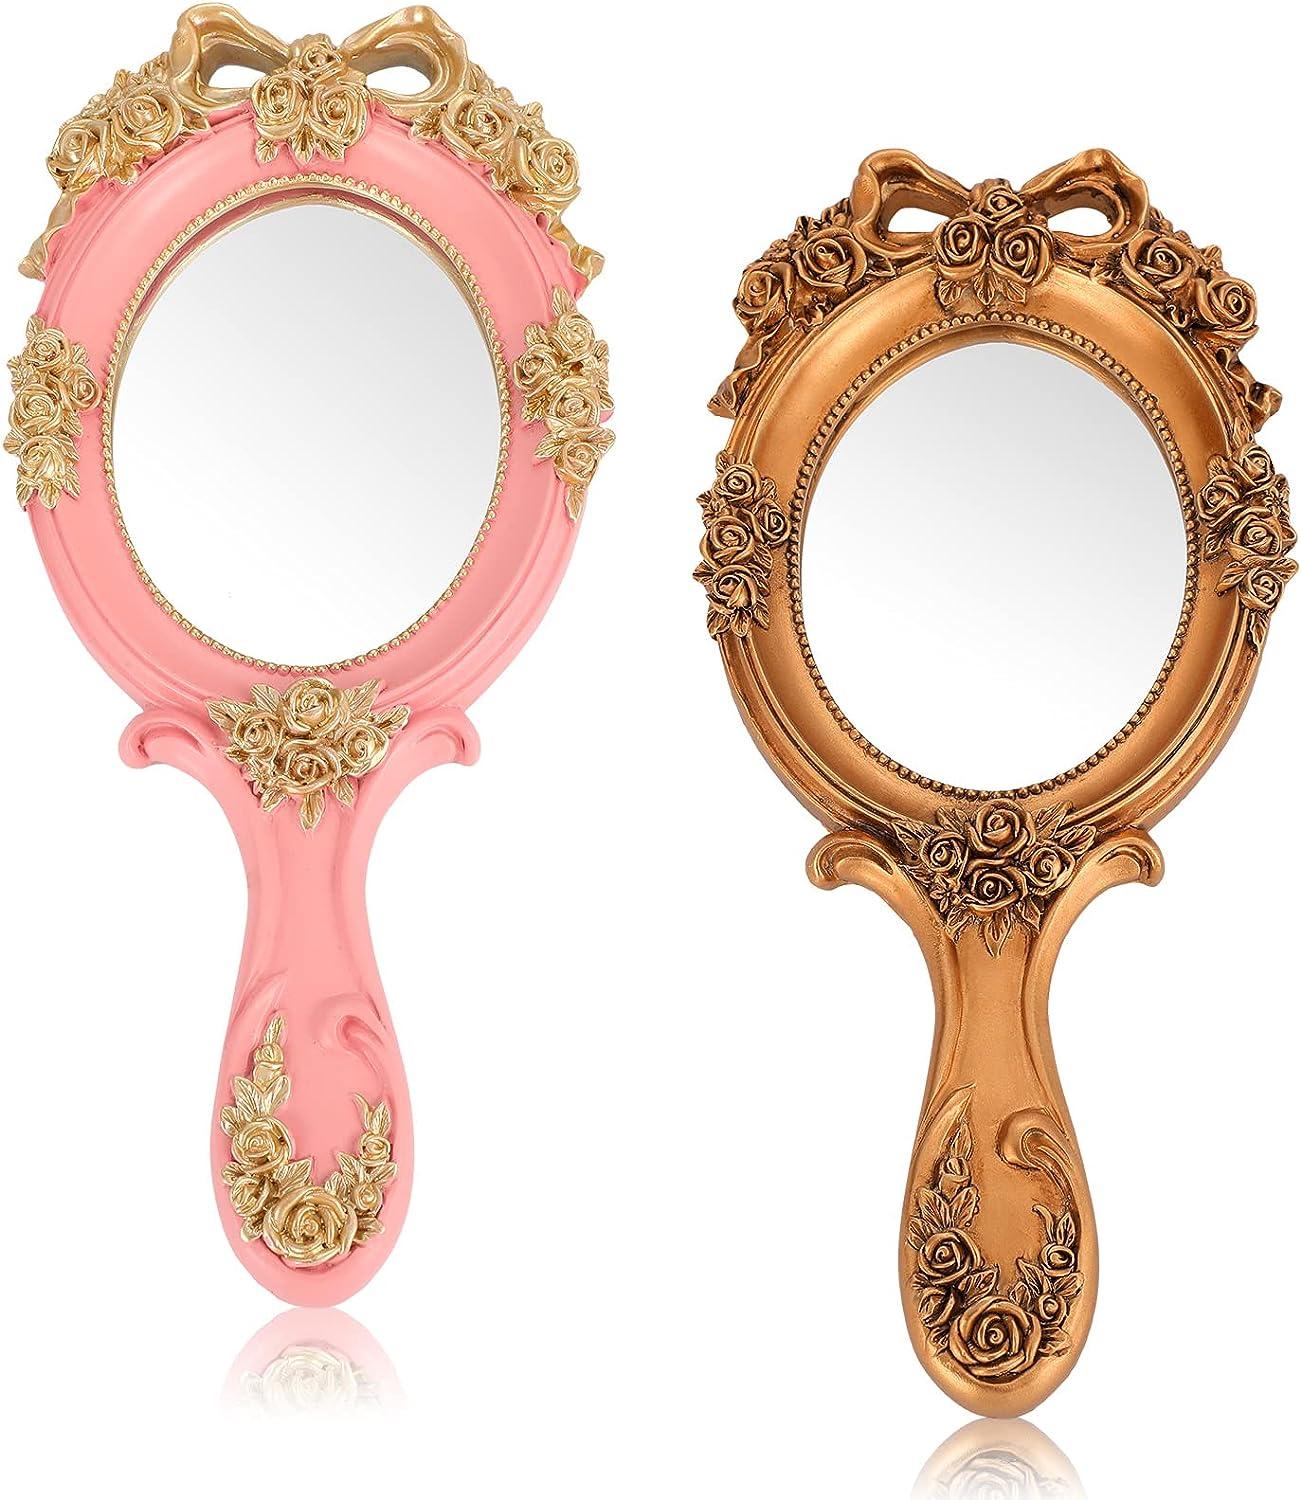 Vintage Handheld Mirror, Small Cute Hand Held Decorative Mirrors For Girls  Makeup Embossed Flower Portable Antique Travel Personal Cosmetic Mirror Wit